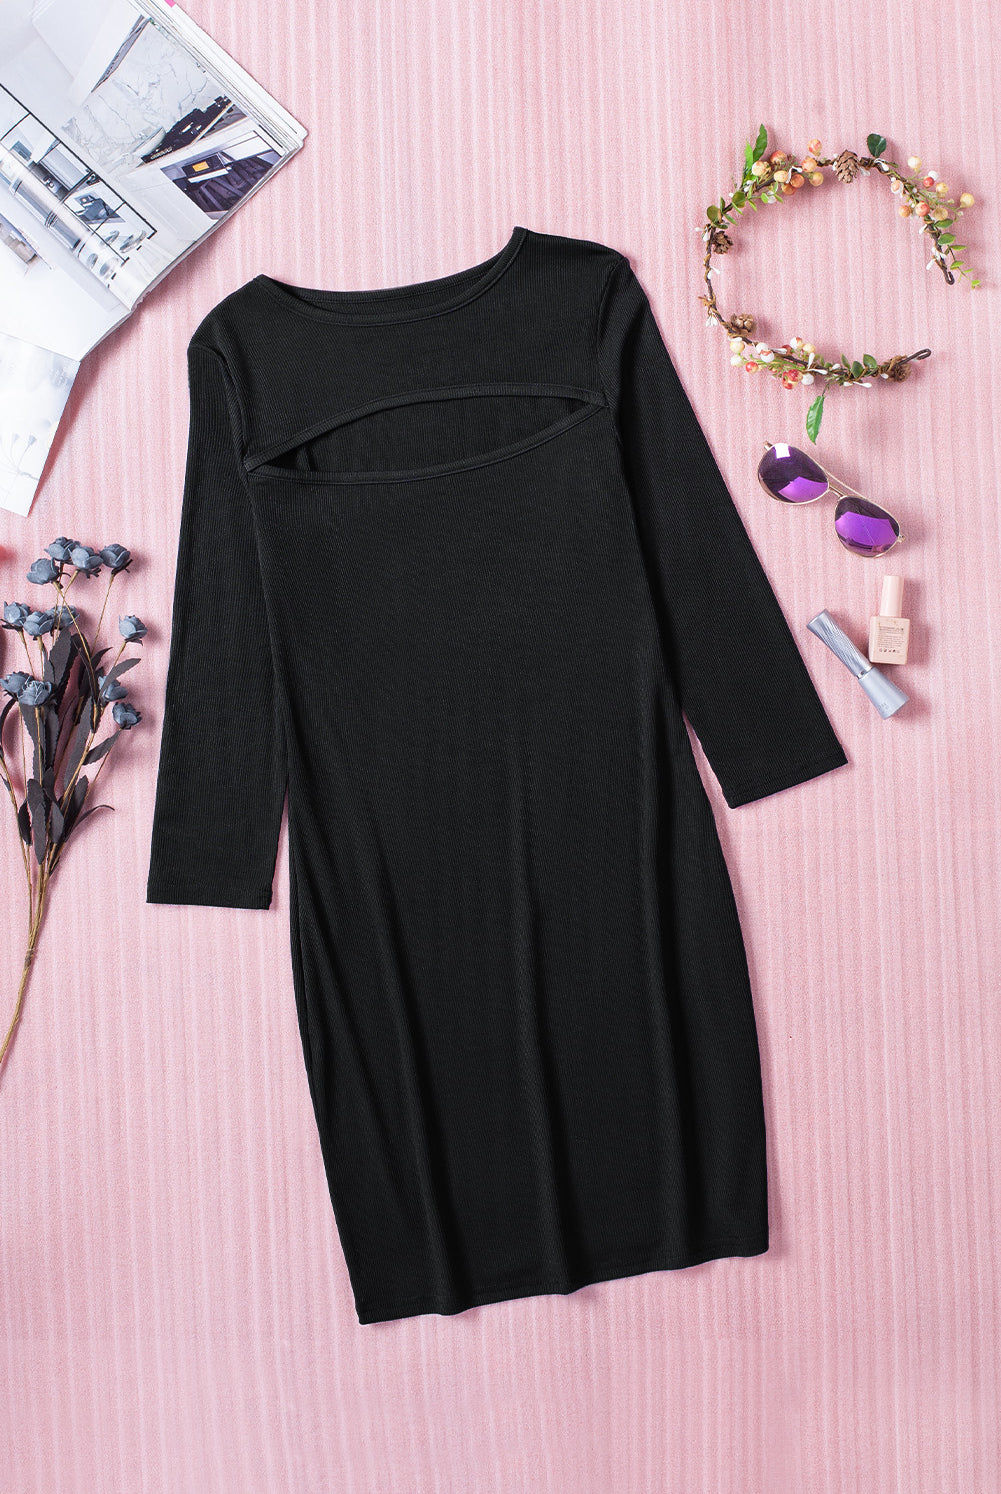 black long sleeve dress from GemThreads Boutique